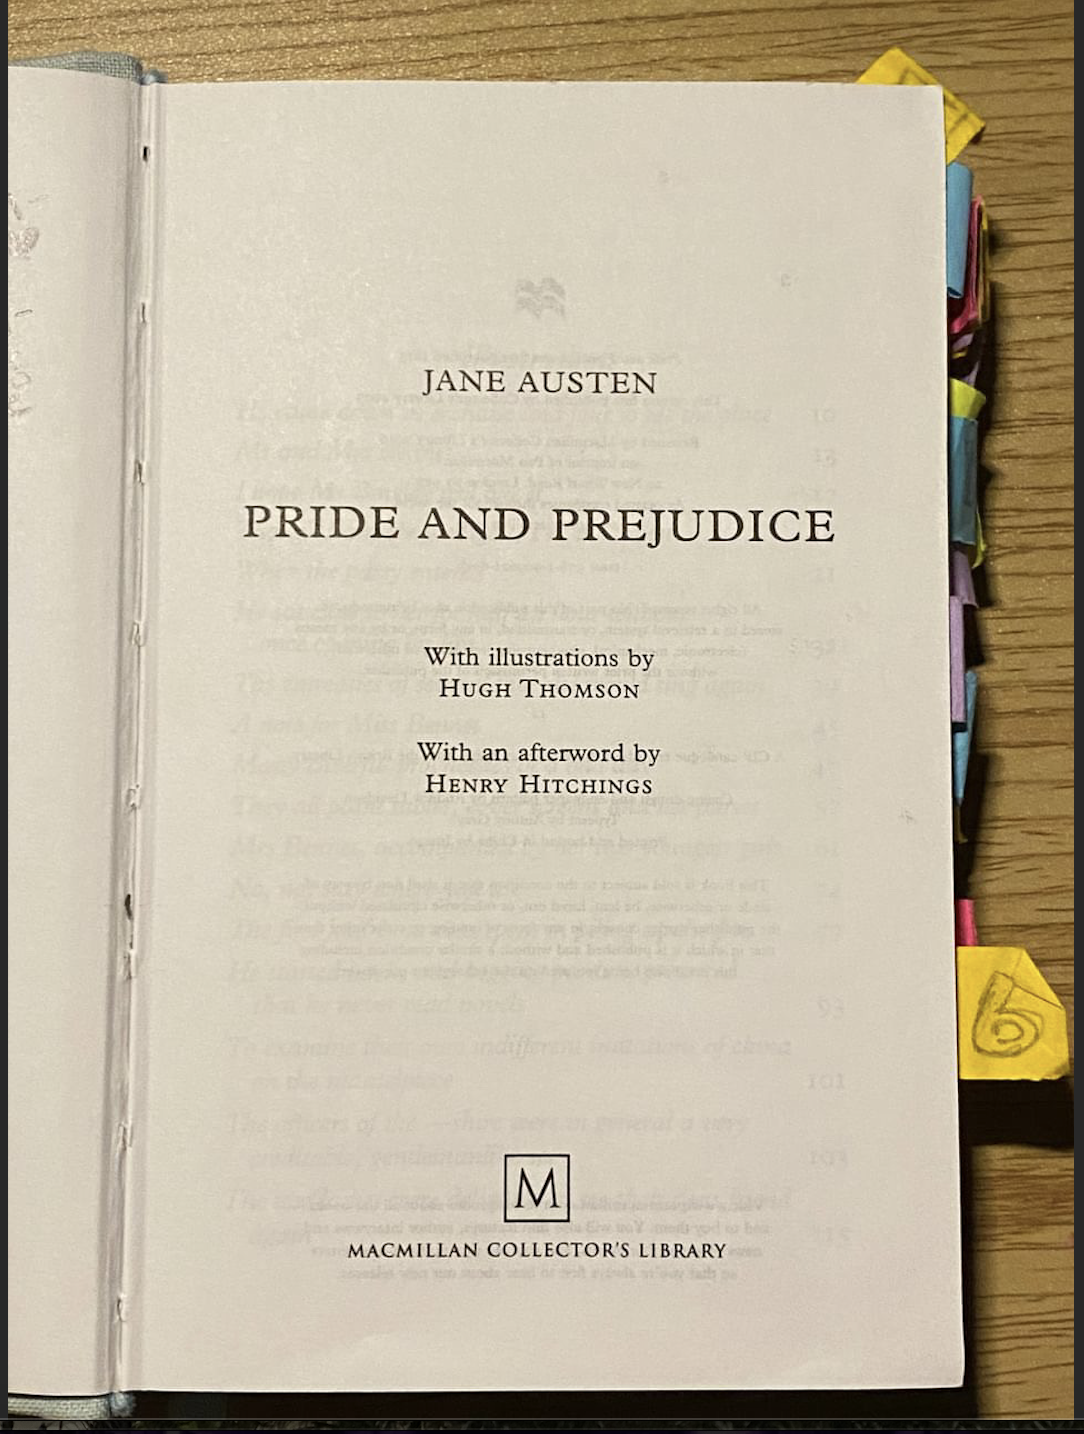 A copy of Pride and Prejudice by Jane Austen